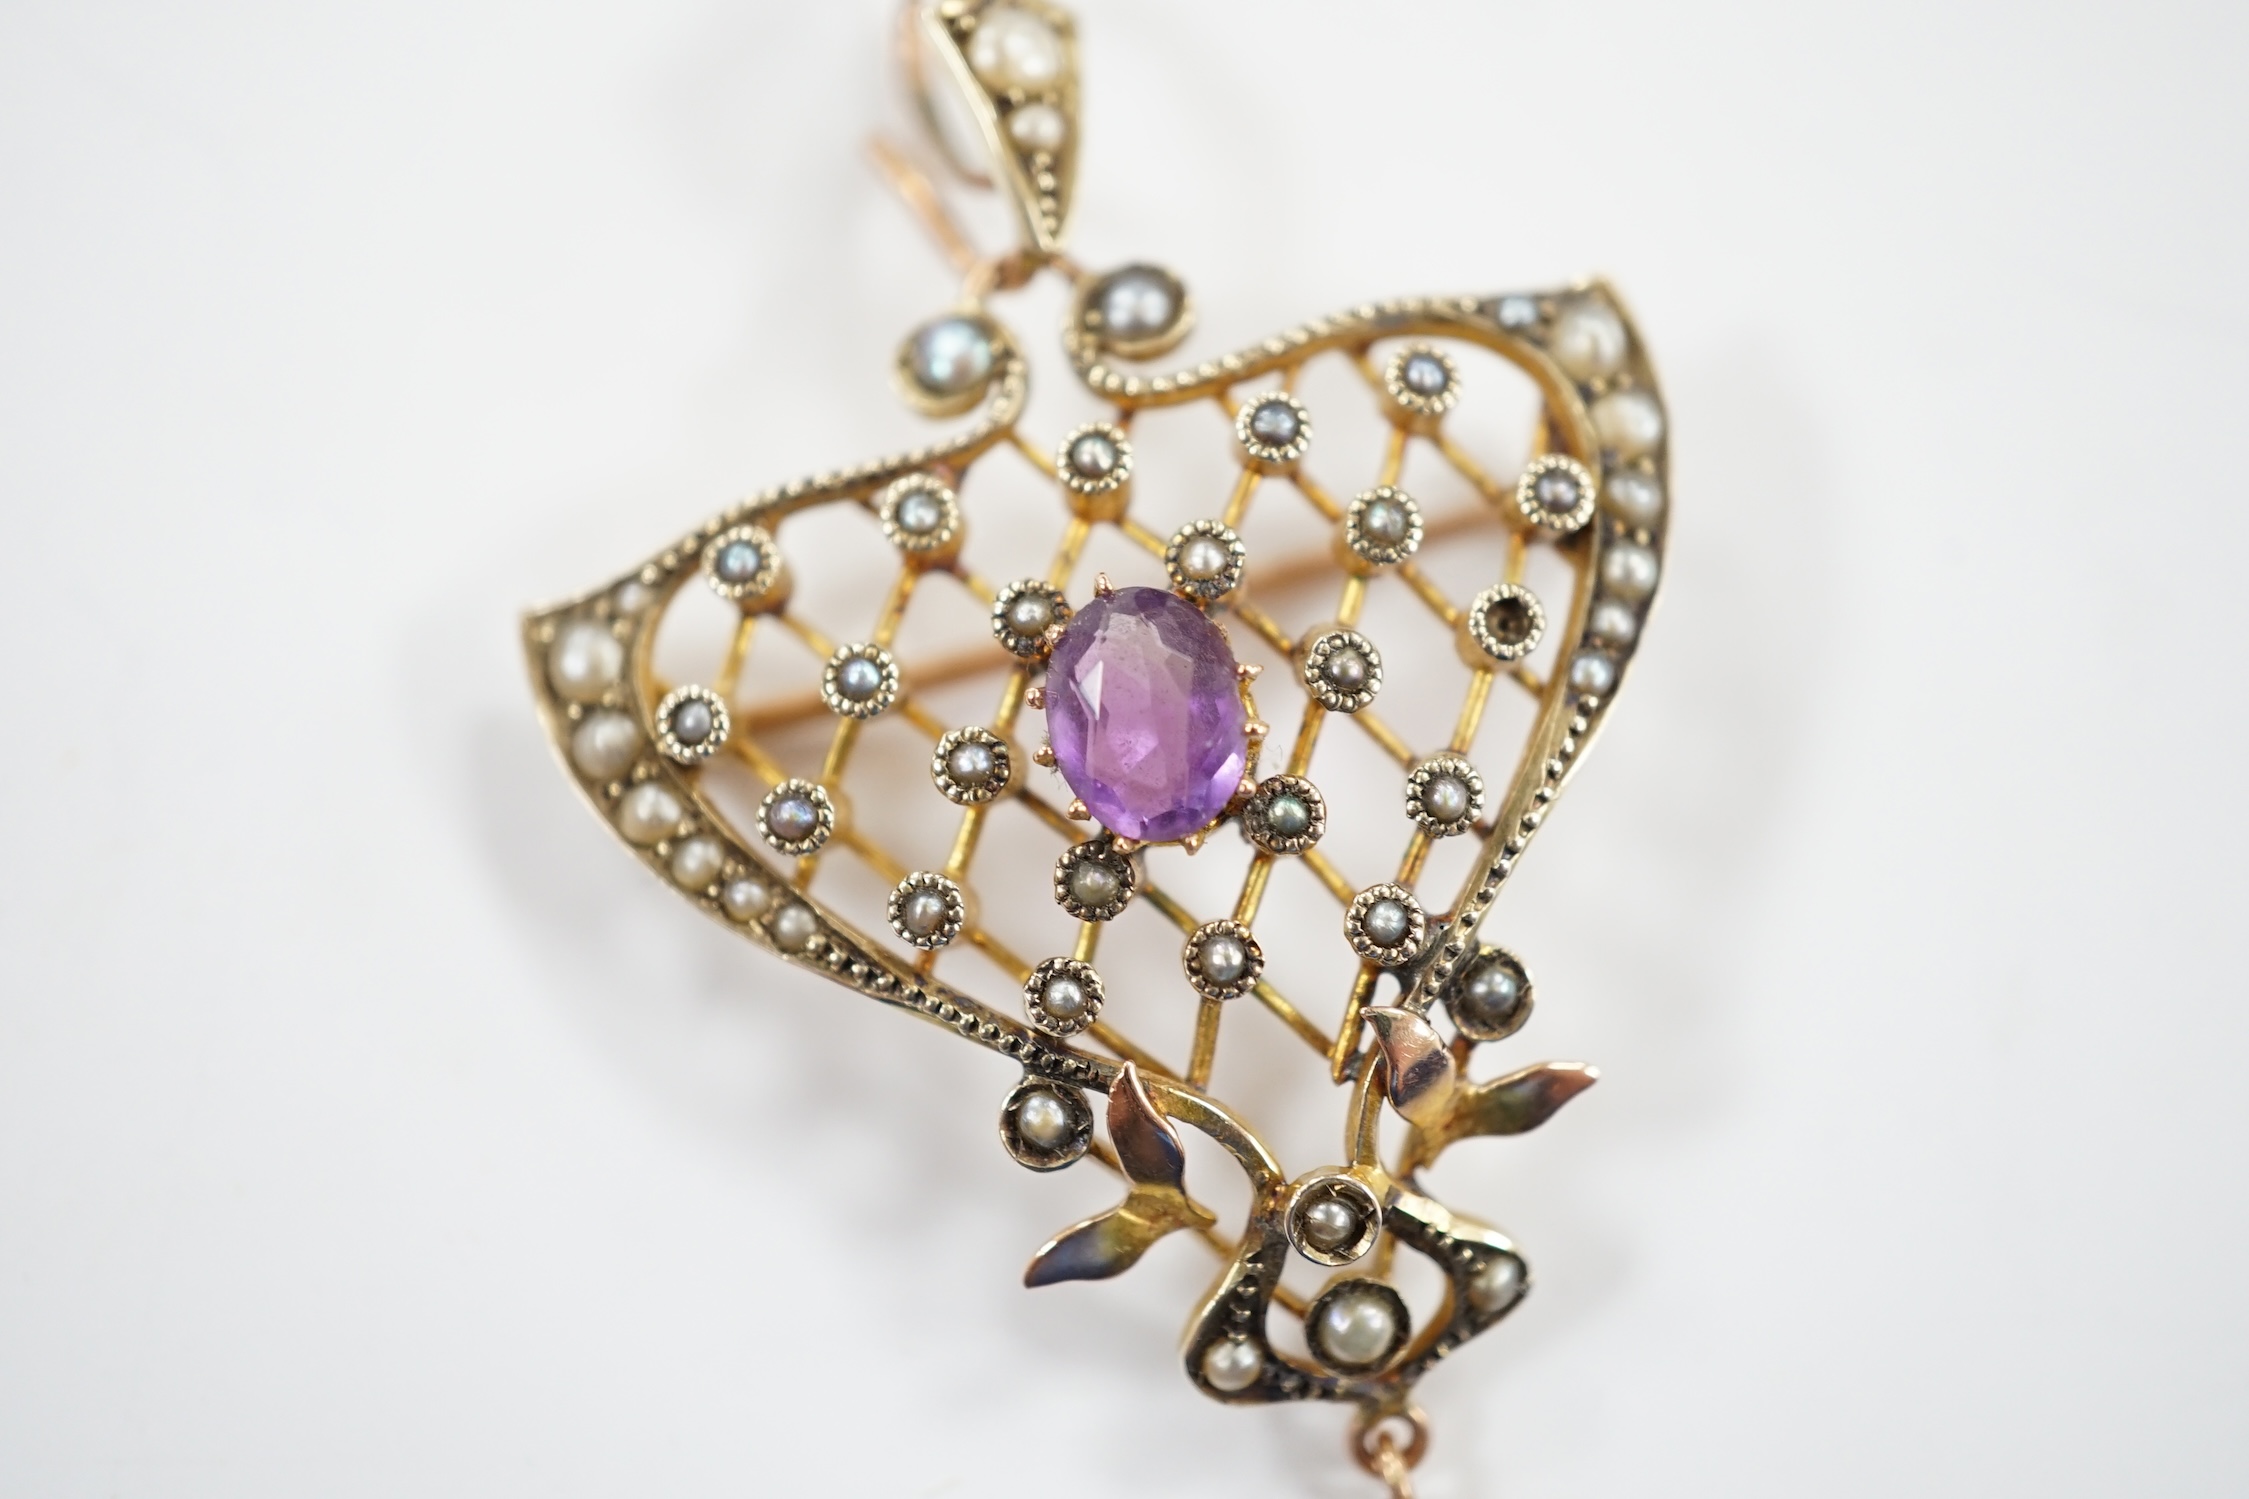 An Edwardian Art Nouveau 9ct, amethyst and seed pearl set drop pendant, 50mm, gross weight 5.2 - Image 3 of 6